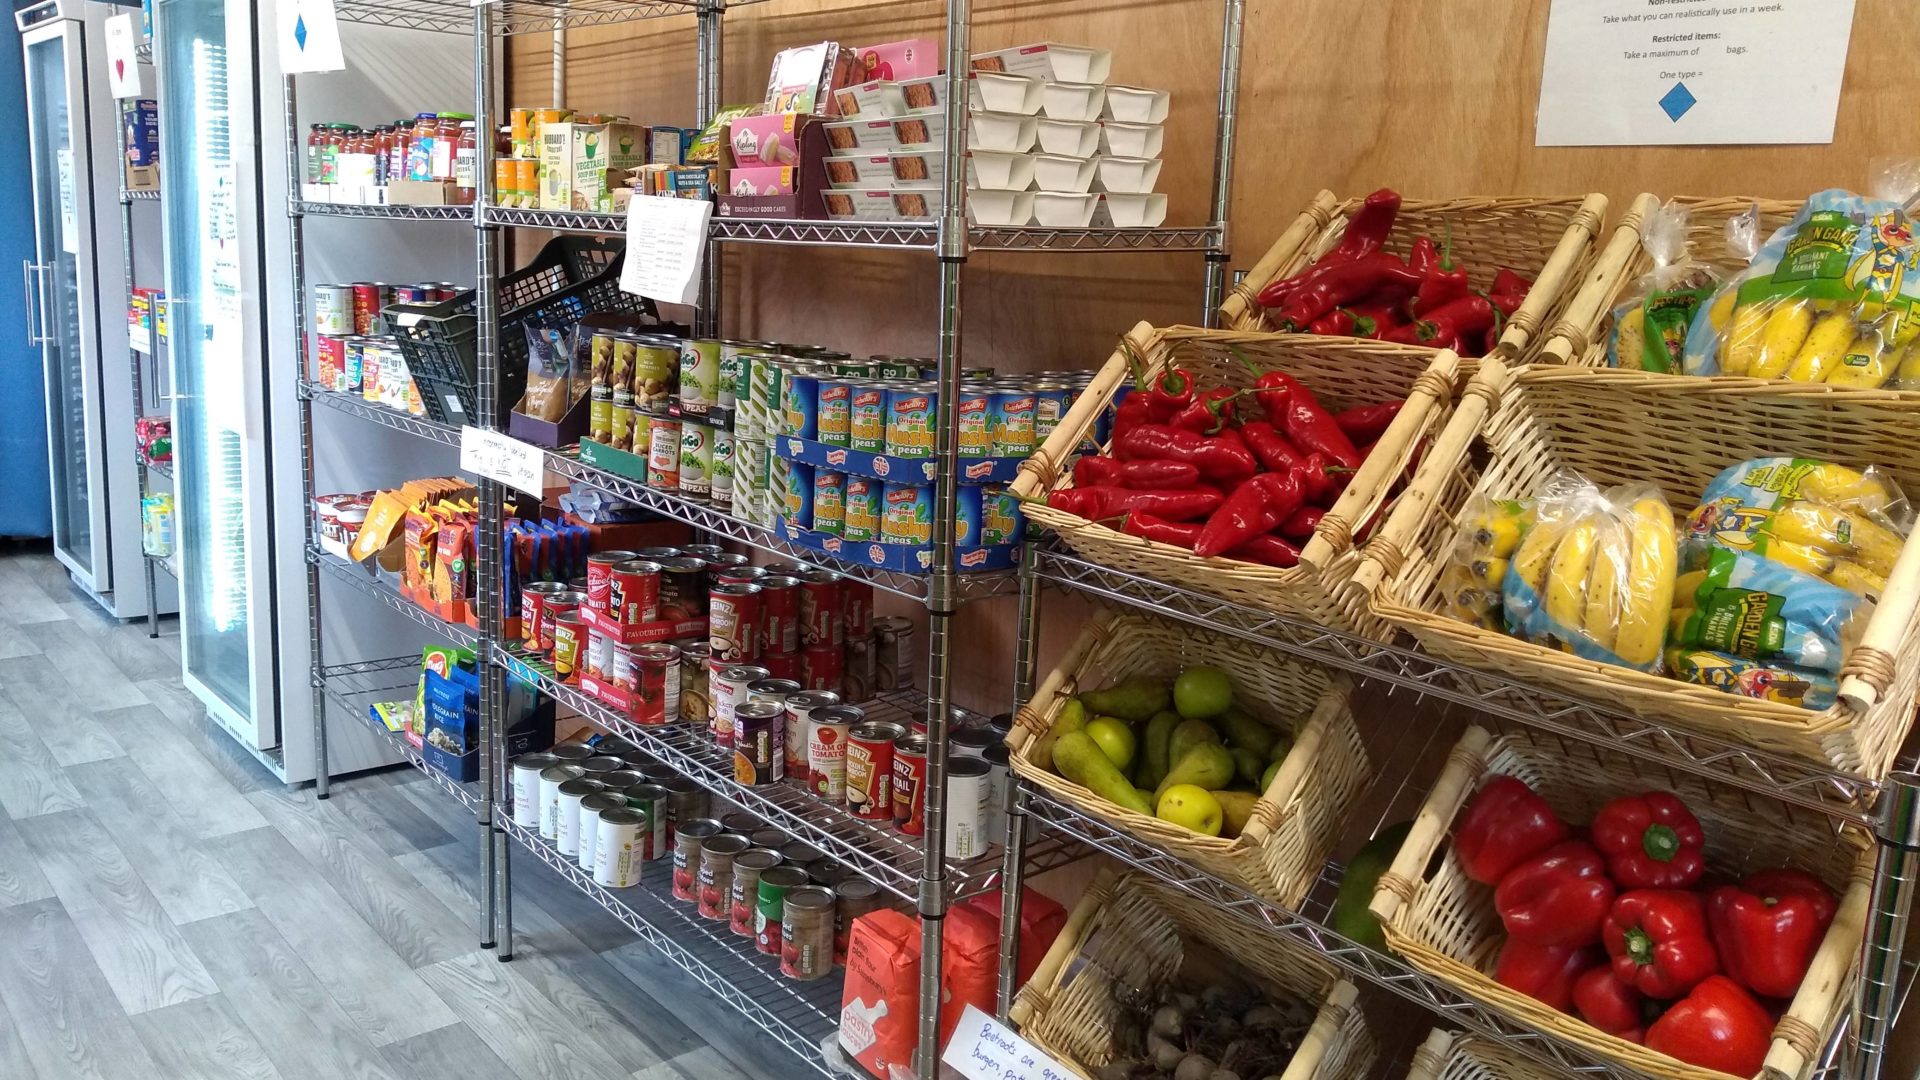 fruit, vegetables, cans and freezers in a shop